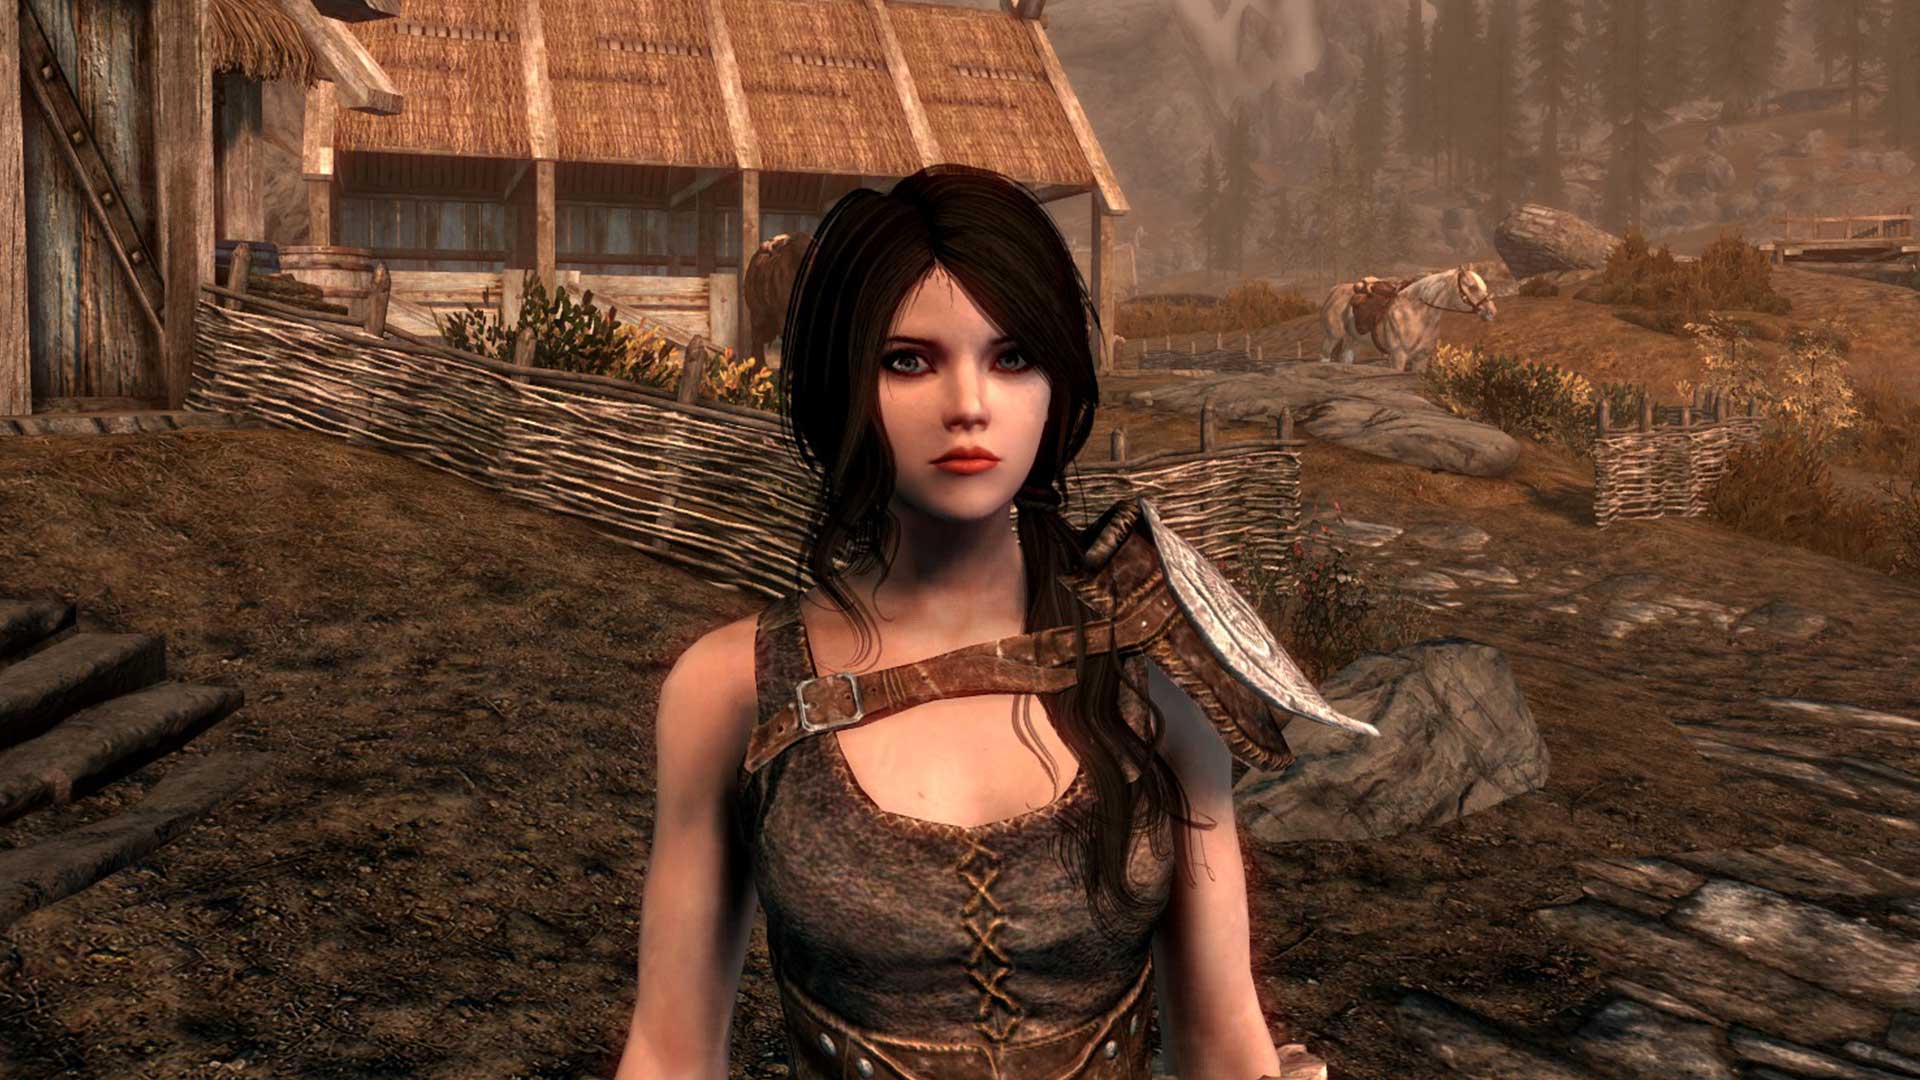 perfectly modded skyrim haccidenlty hit cnt shift